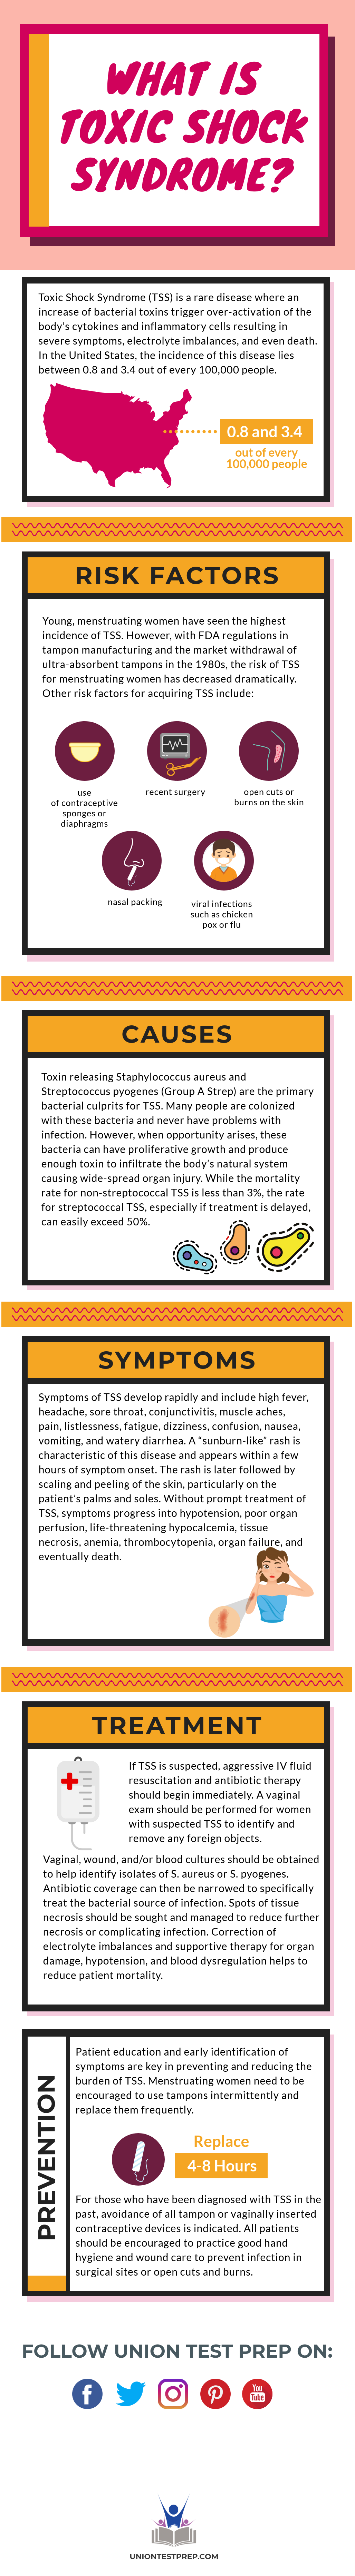 What is Toxic Shock Syndrome